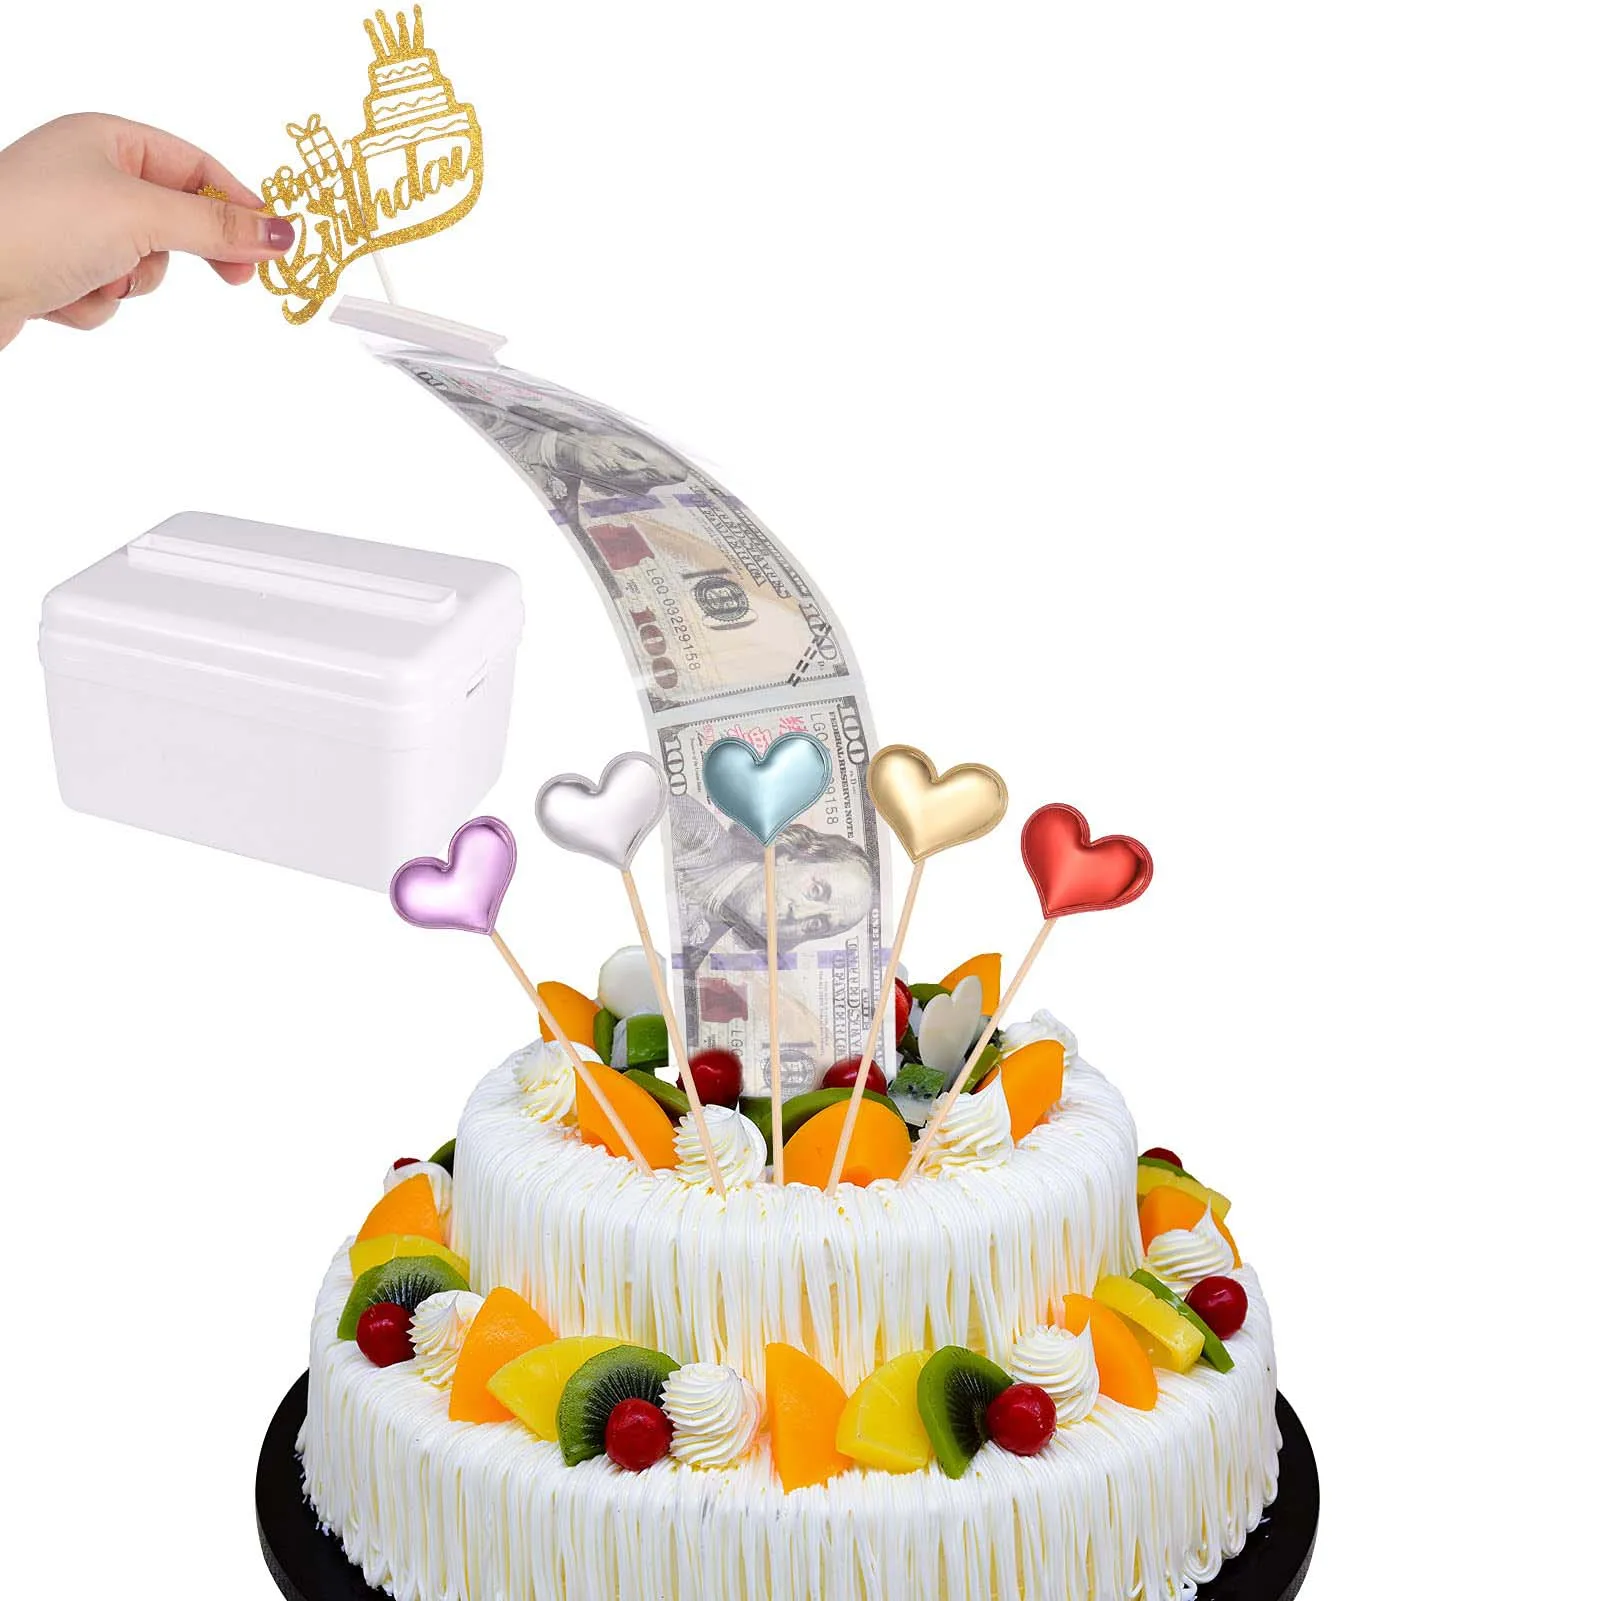 

HelloWorld Funny Cake Kid Gift Happy Decor Pull Money Surprise Box Cake Tool Cake ATM Surprise Birthday Party Topper Money Box